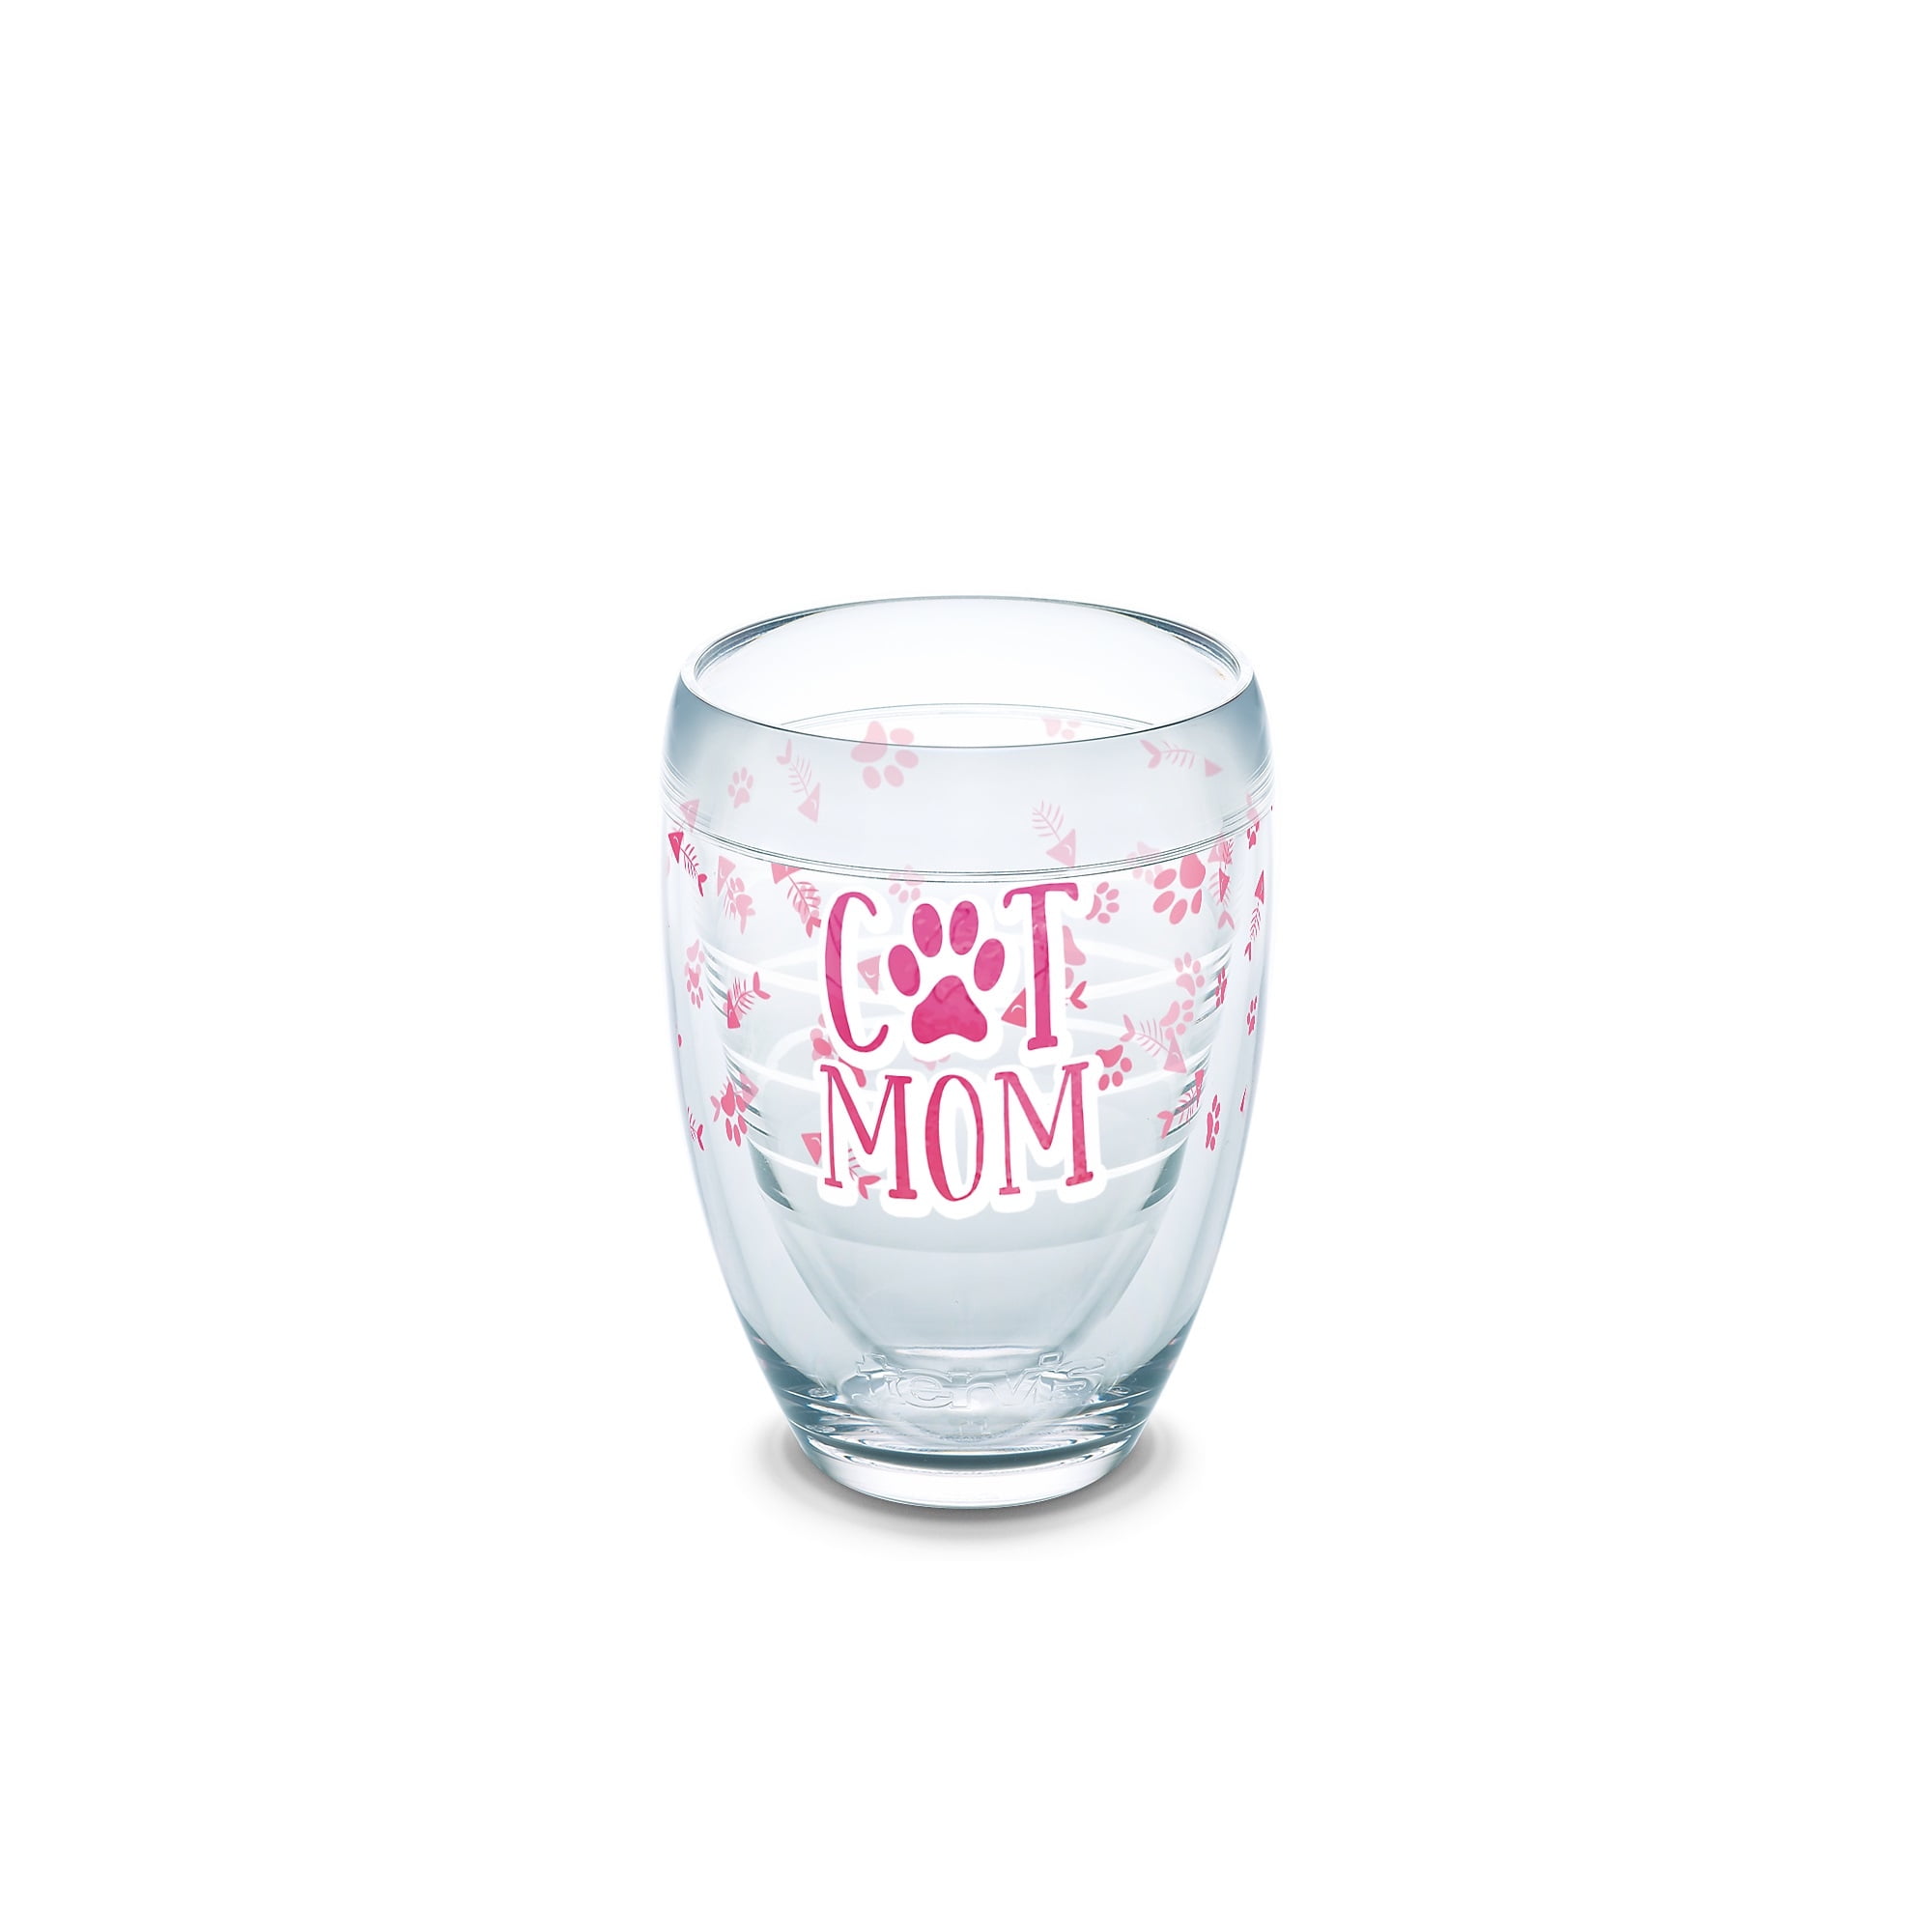 Proud Pixie Bob Cat Mom Red Insulated Wine Tumbler W Lid Gift For Pixie Bob Cat Moms Birthday Present Ideas Wine Glasses Gift For Her